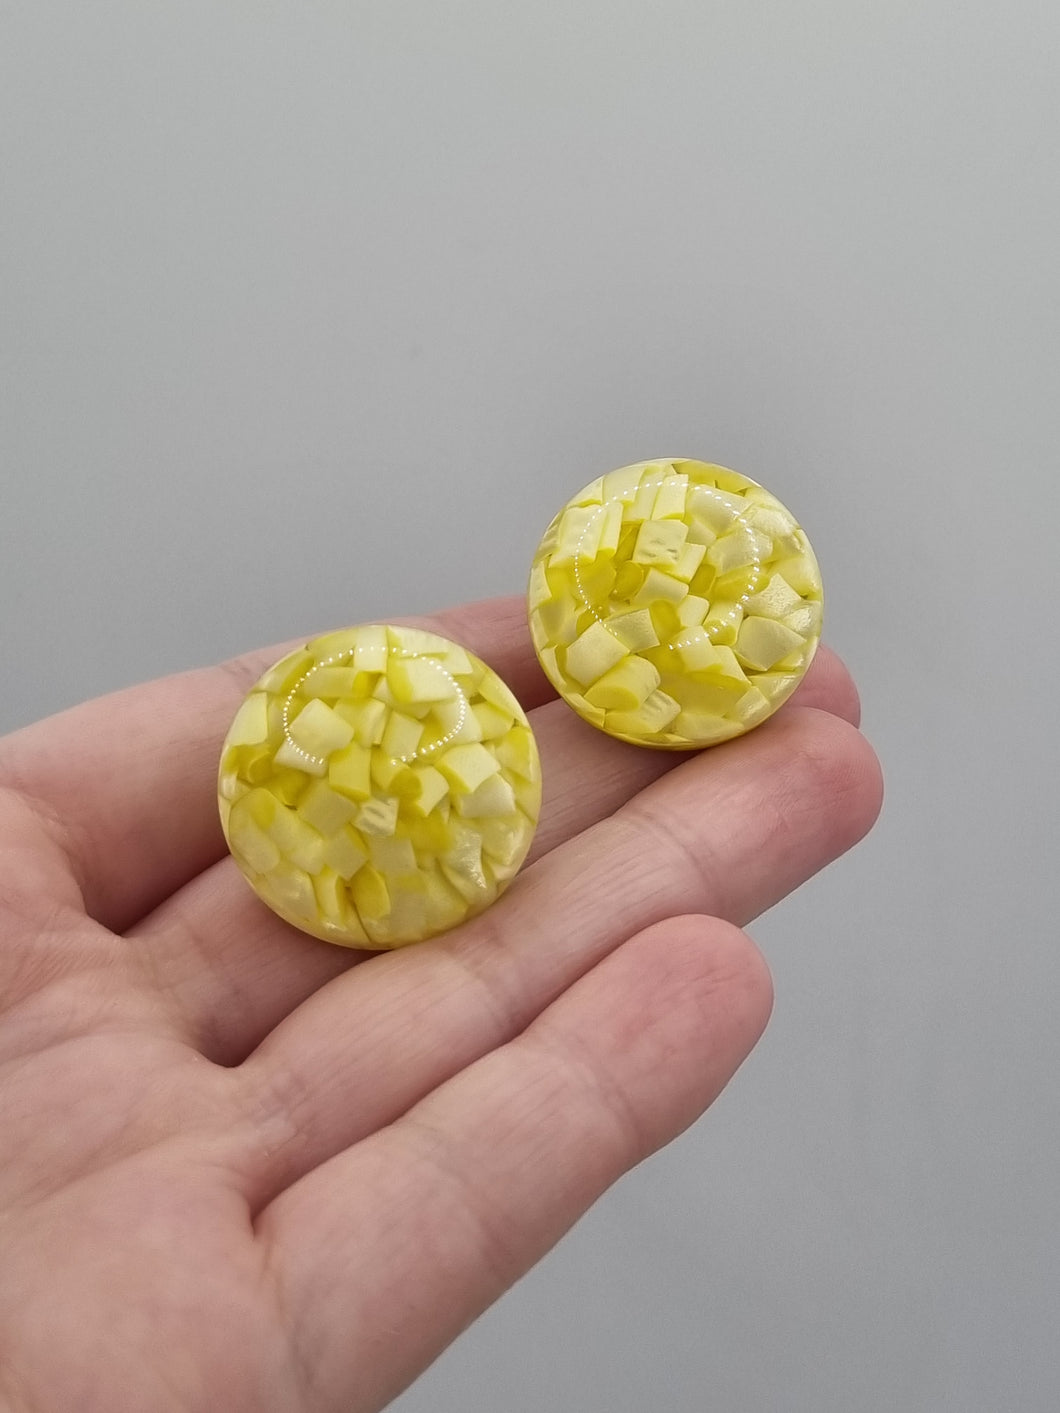 1950s Chunky Bright Yellow Lucite Earrings